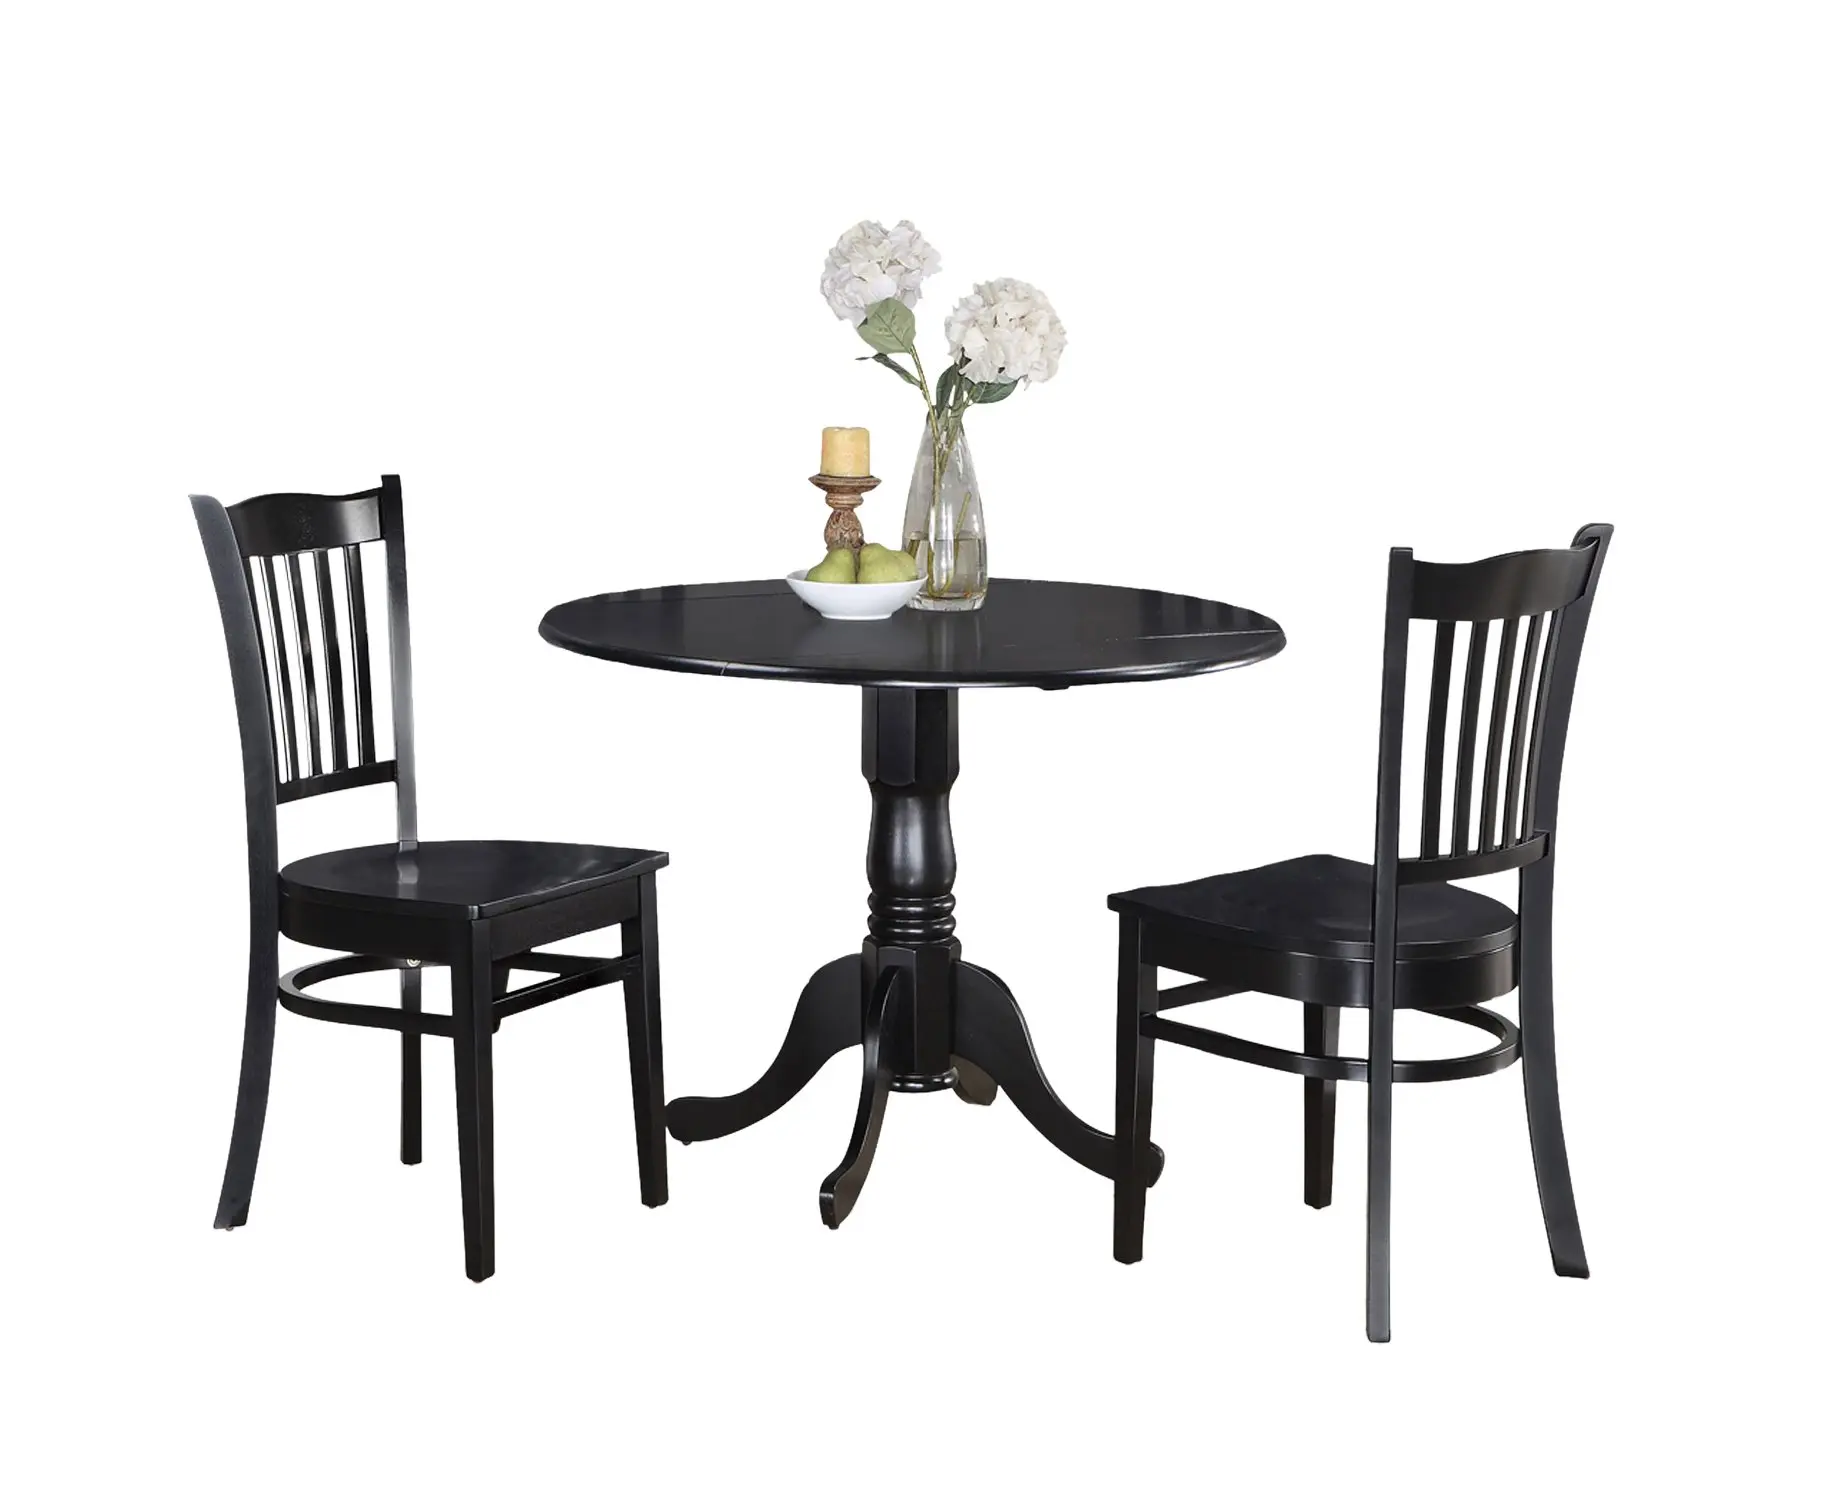 Cheap Kitchen Table Black, find Kitchen Table Black deals on line at